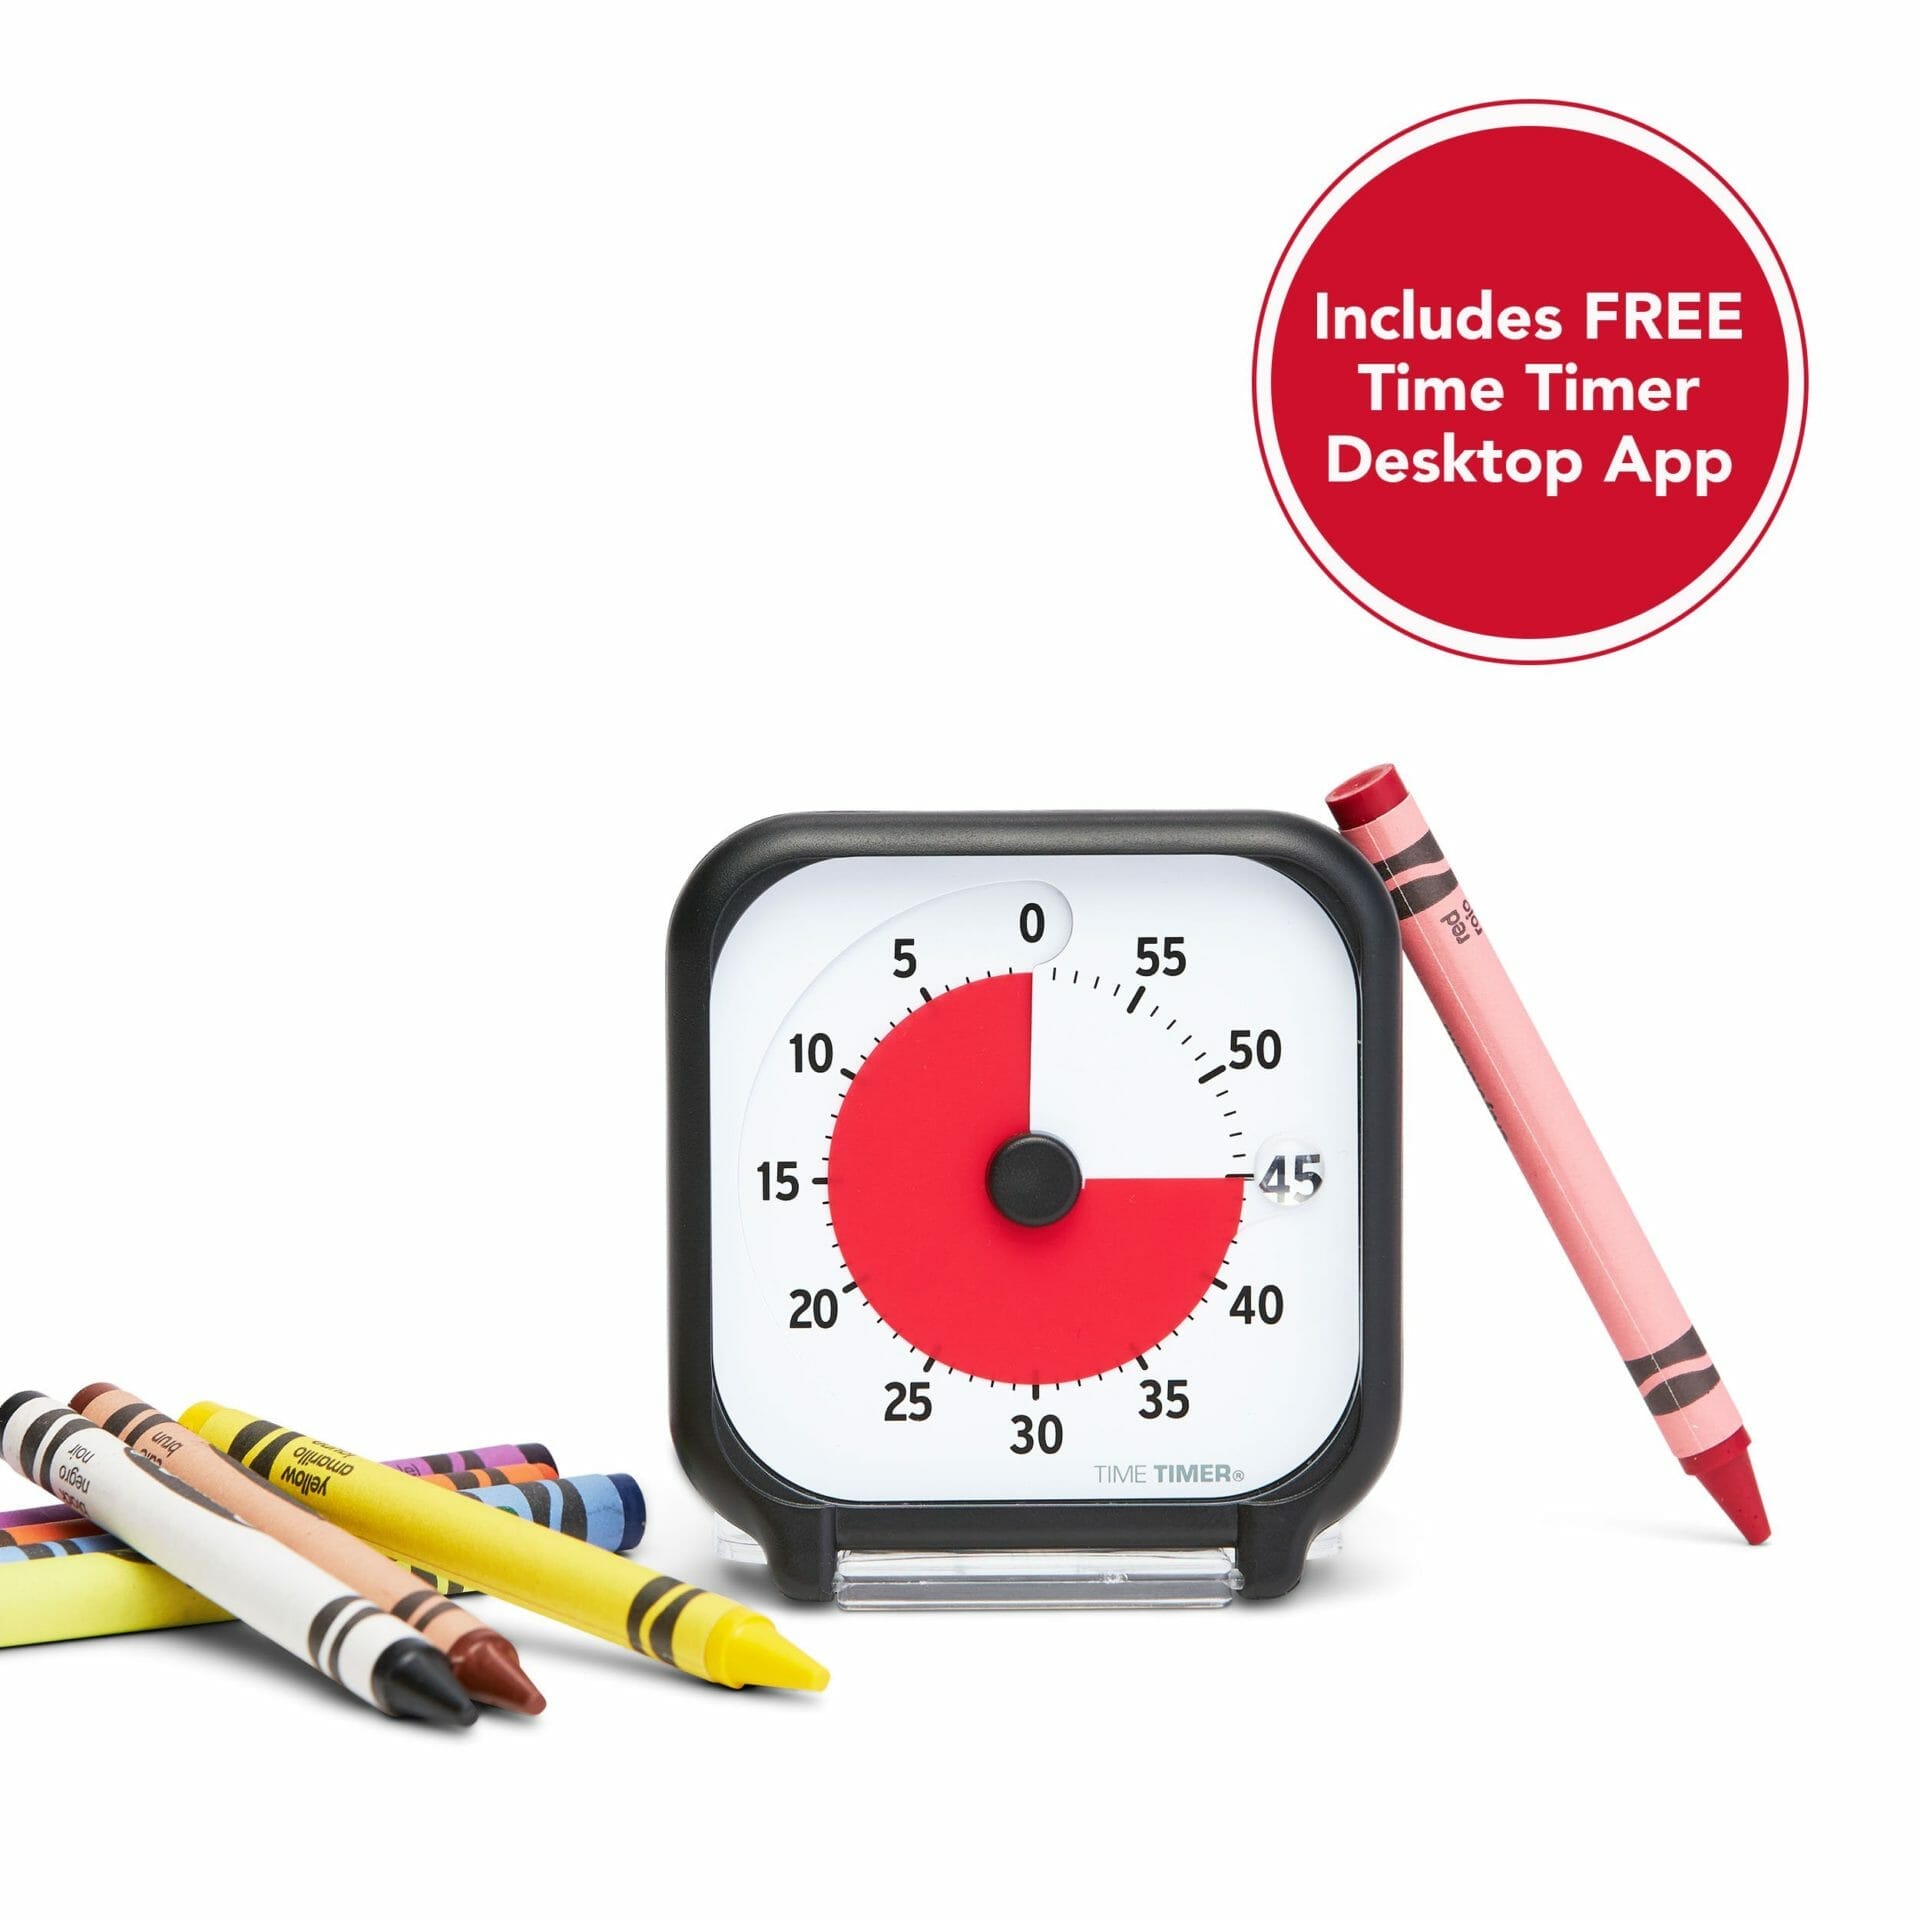 Time Timer 8 Magnetic - Inspiring Young Minds to Learn